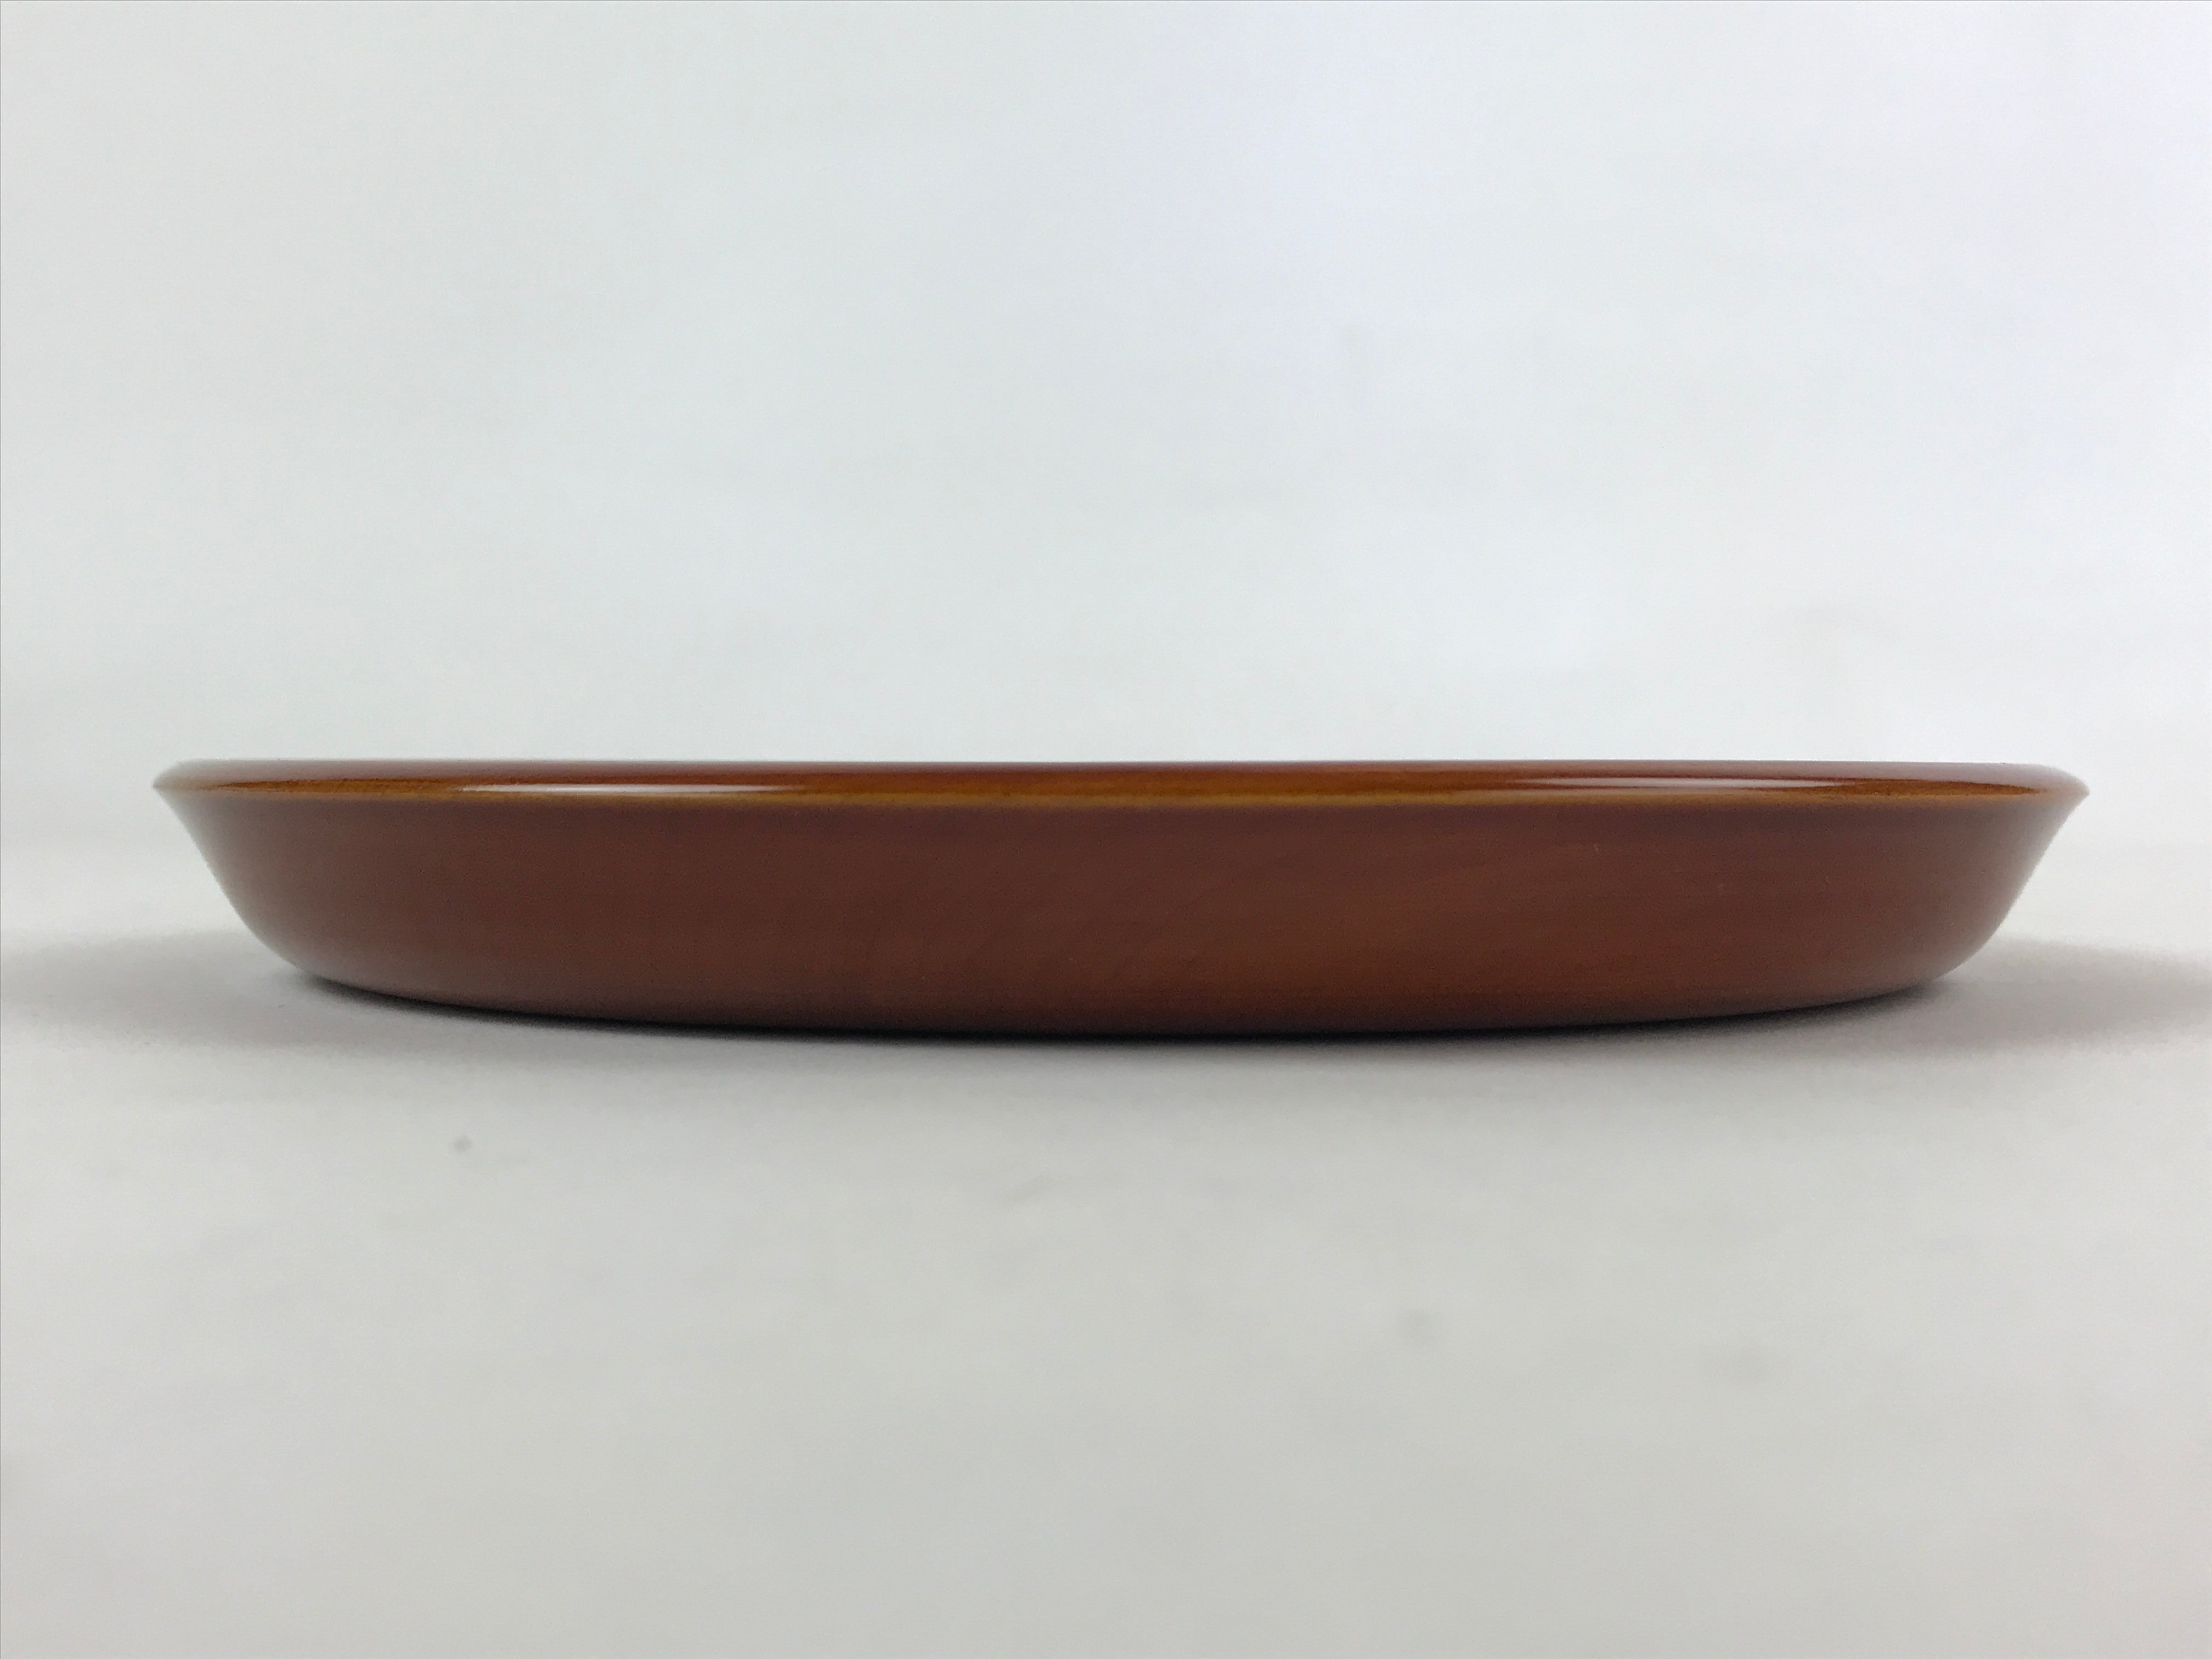 Japanese Brushed Lacquer Wooden Serving Tray Vtg Round Obon Brown Shunkei L34